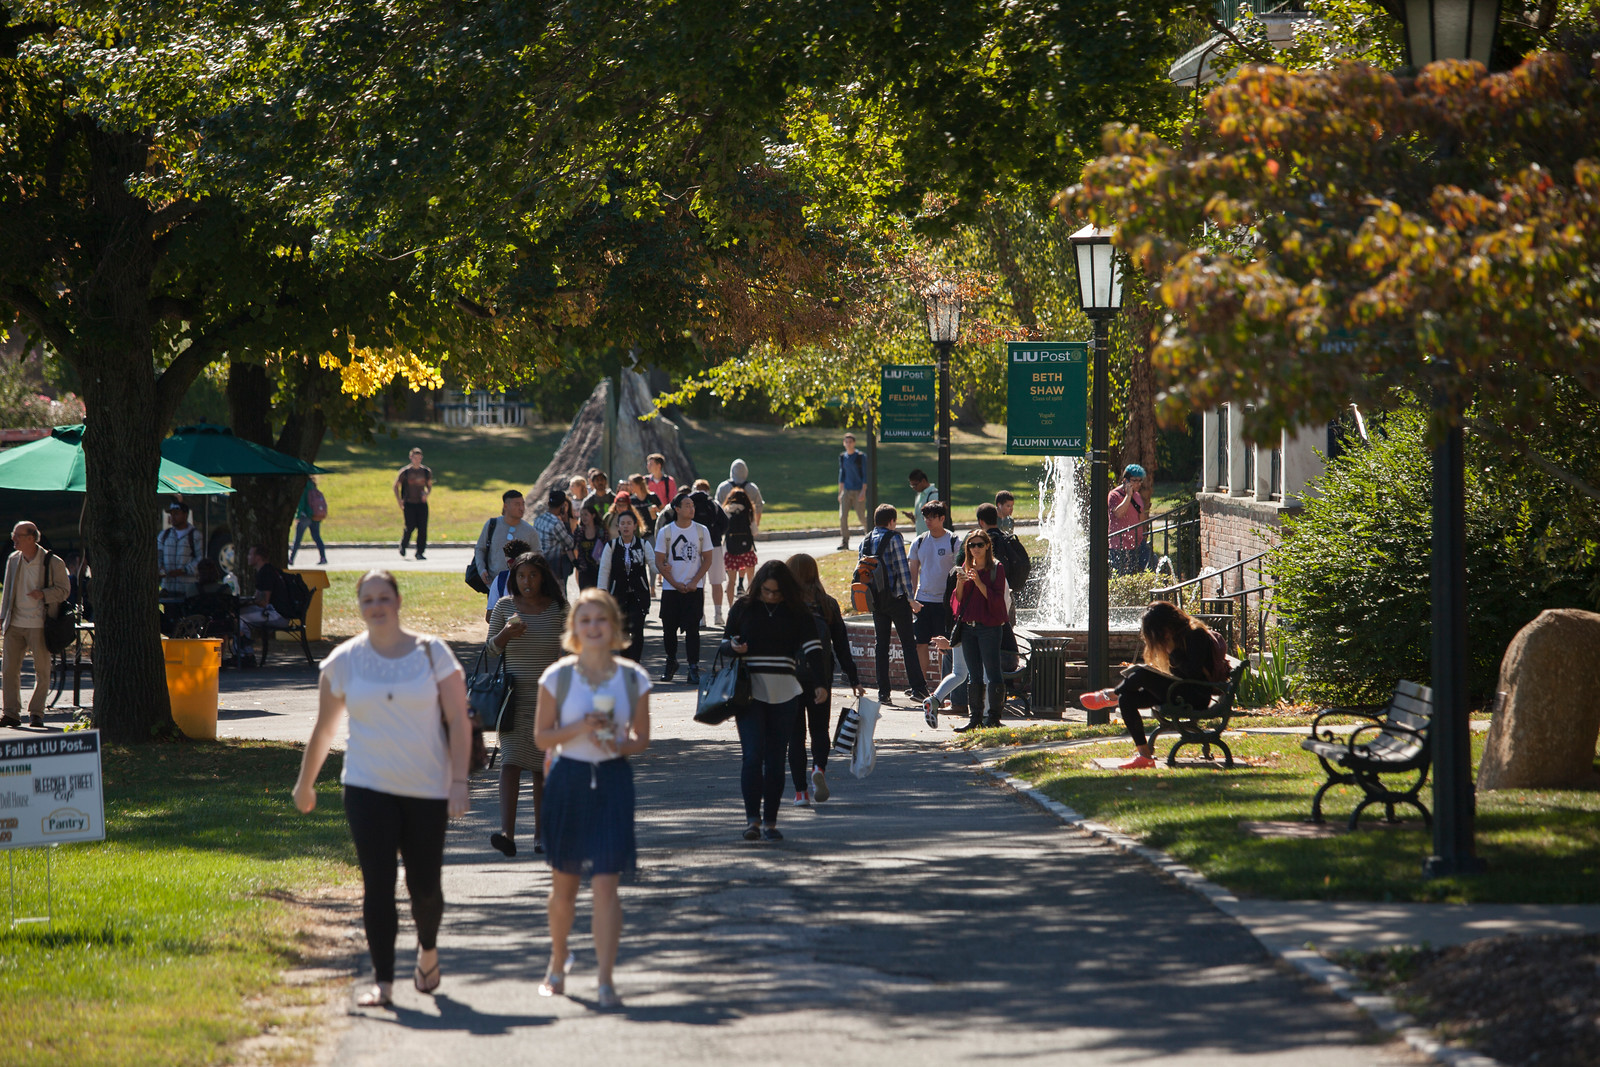 LIU Post and other local colleges and universities are starting summer class registration soon.